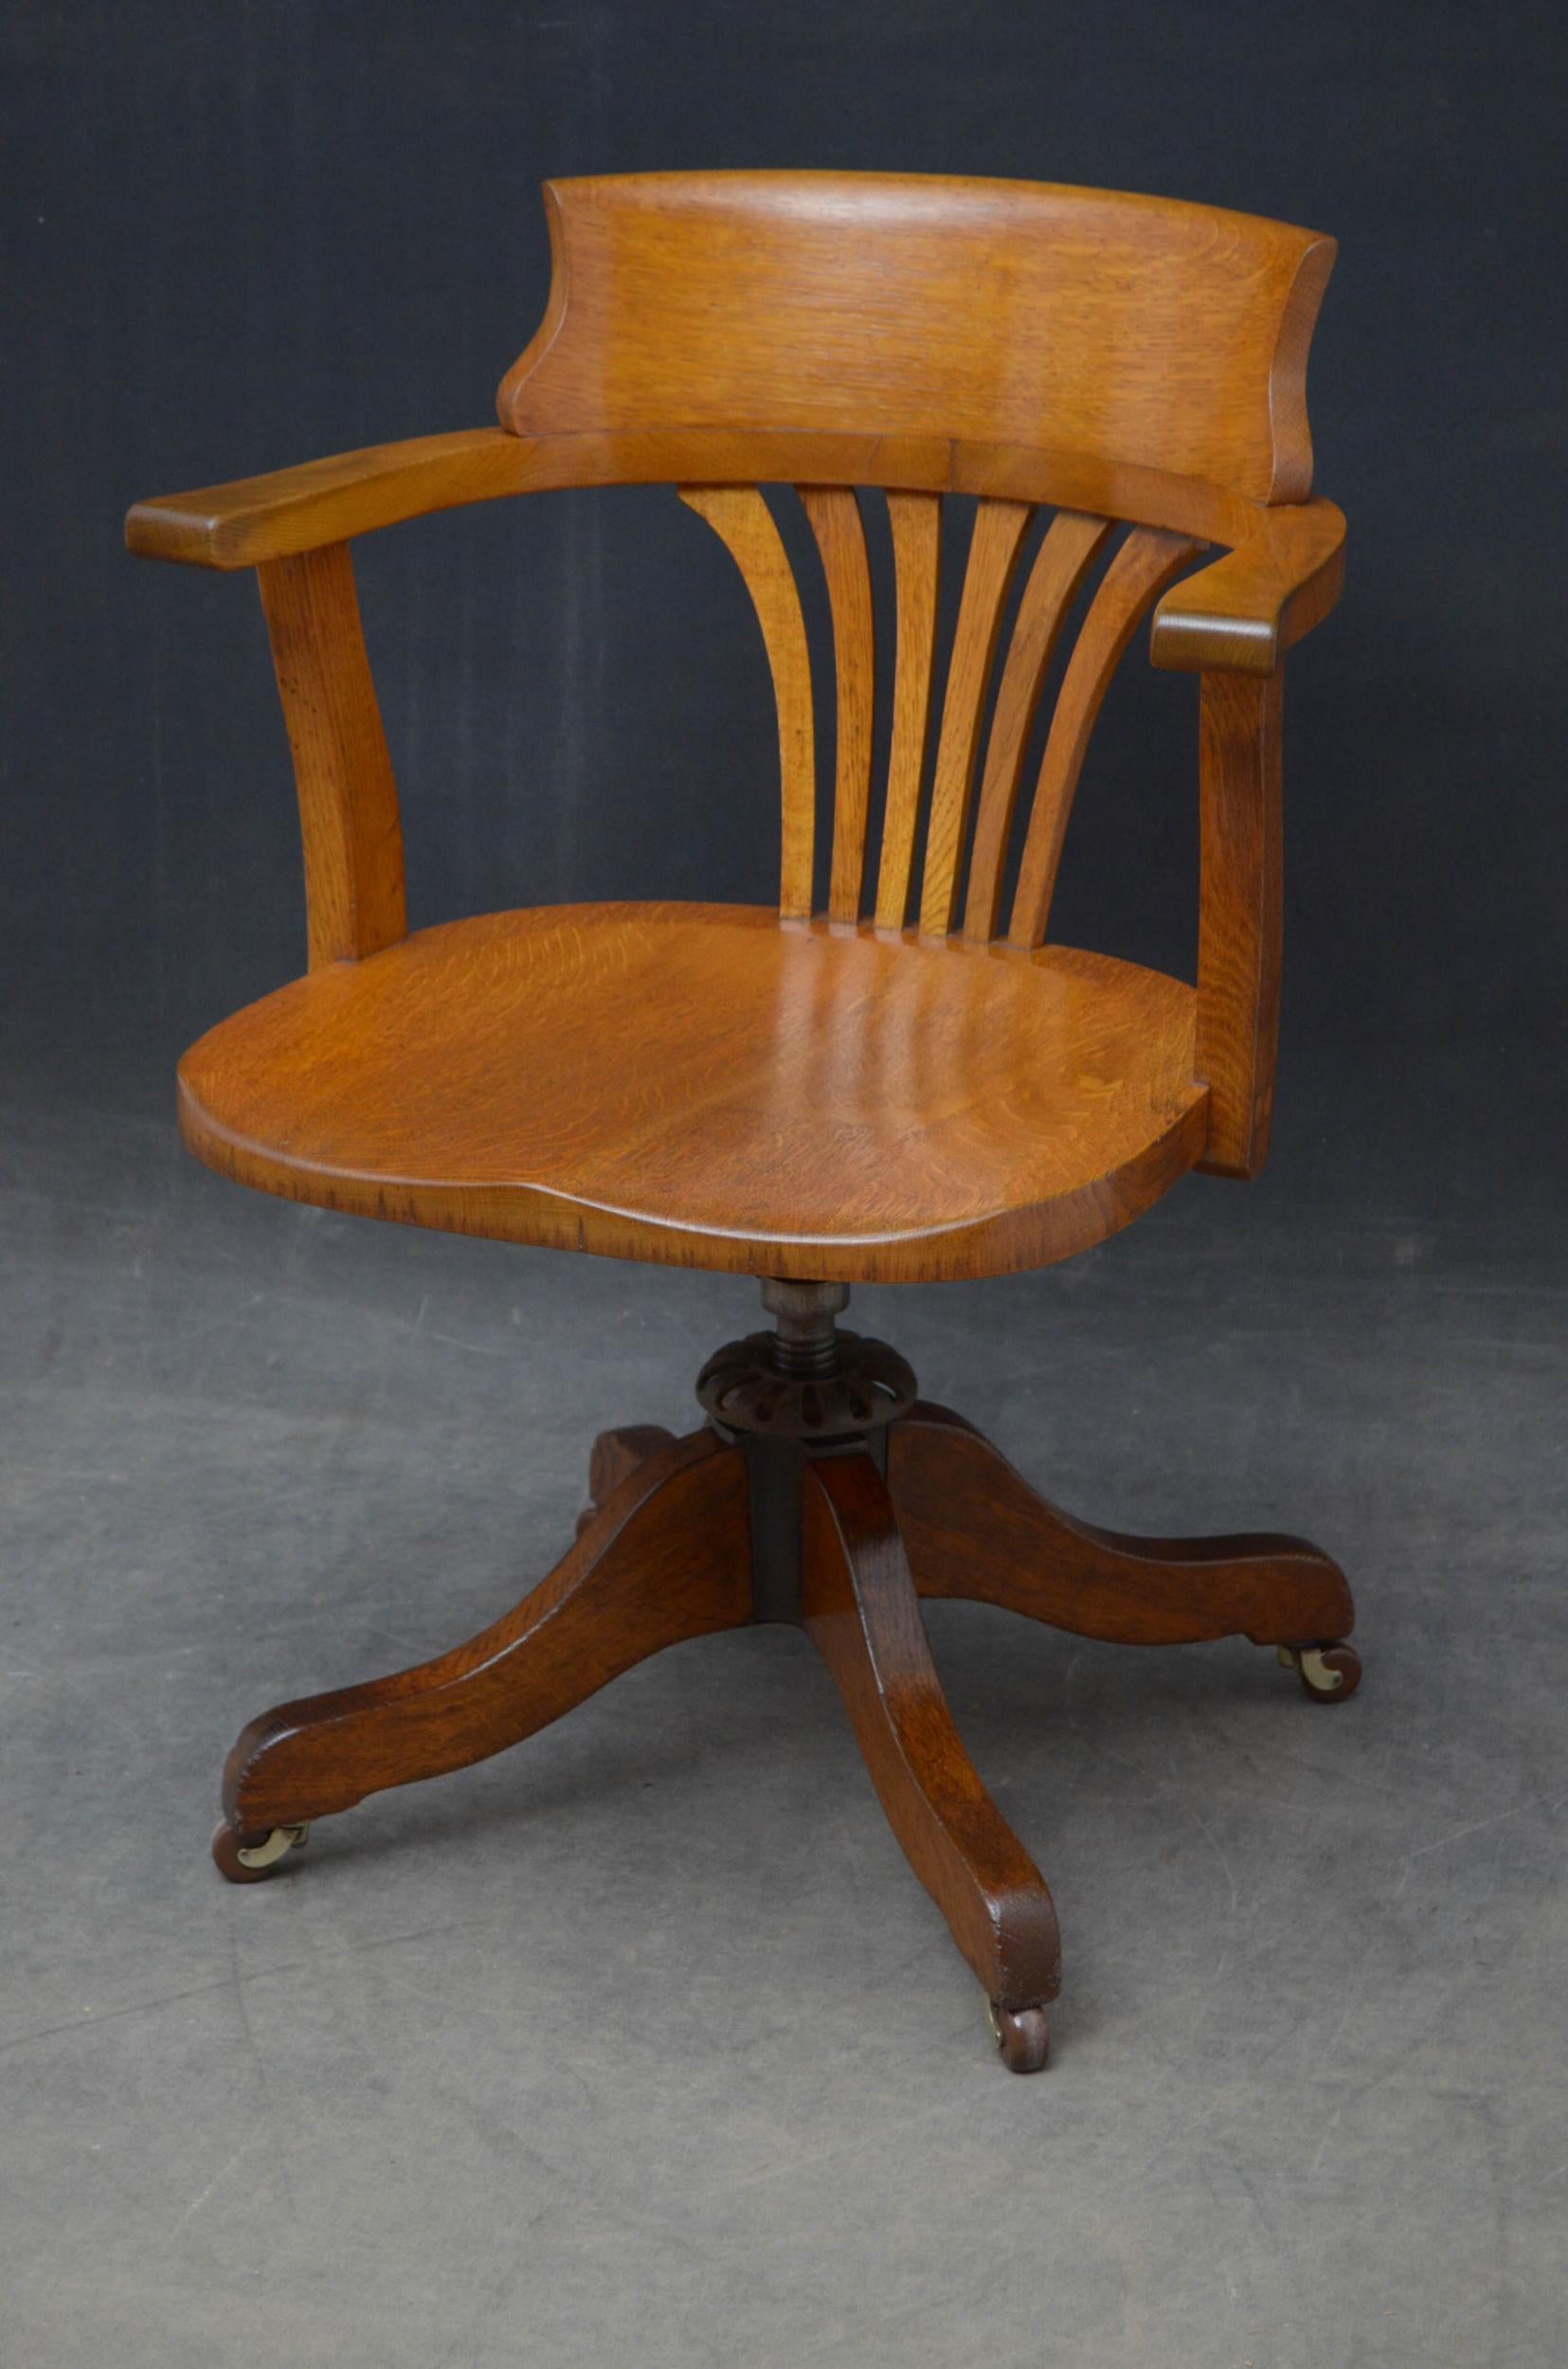 Sn5036, elegant revolving desk chair in oak, having shaped top rails with six splats below, open arms and generous seat, raised on revolving mechanism with four shaped legs terminating in brass castors. This antique chairs has been syamthetically